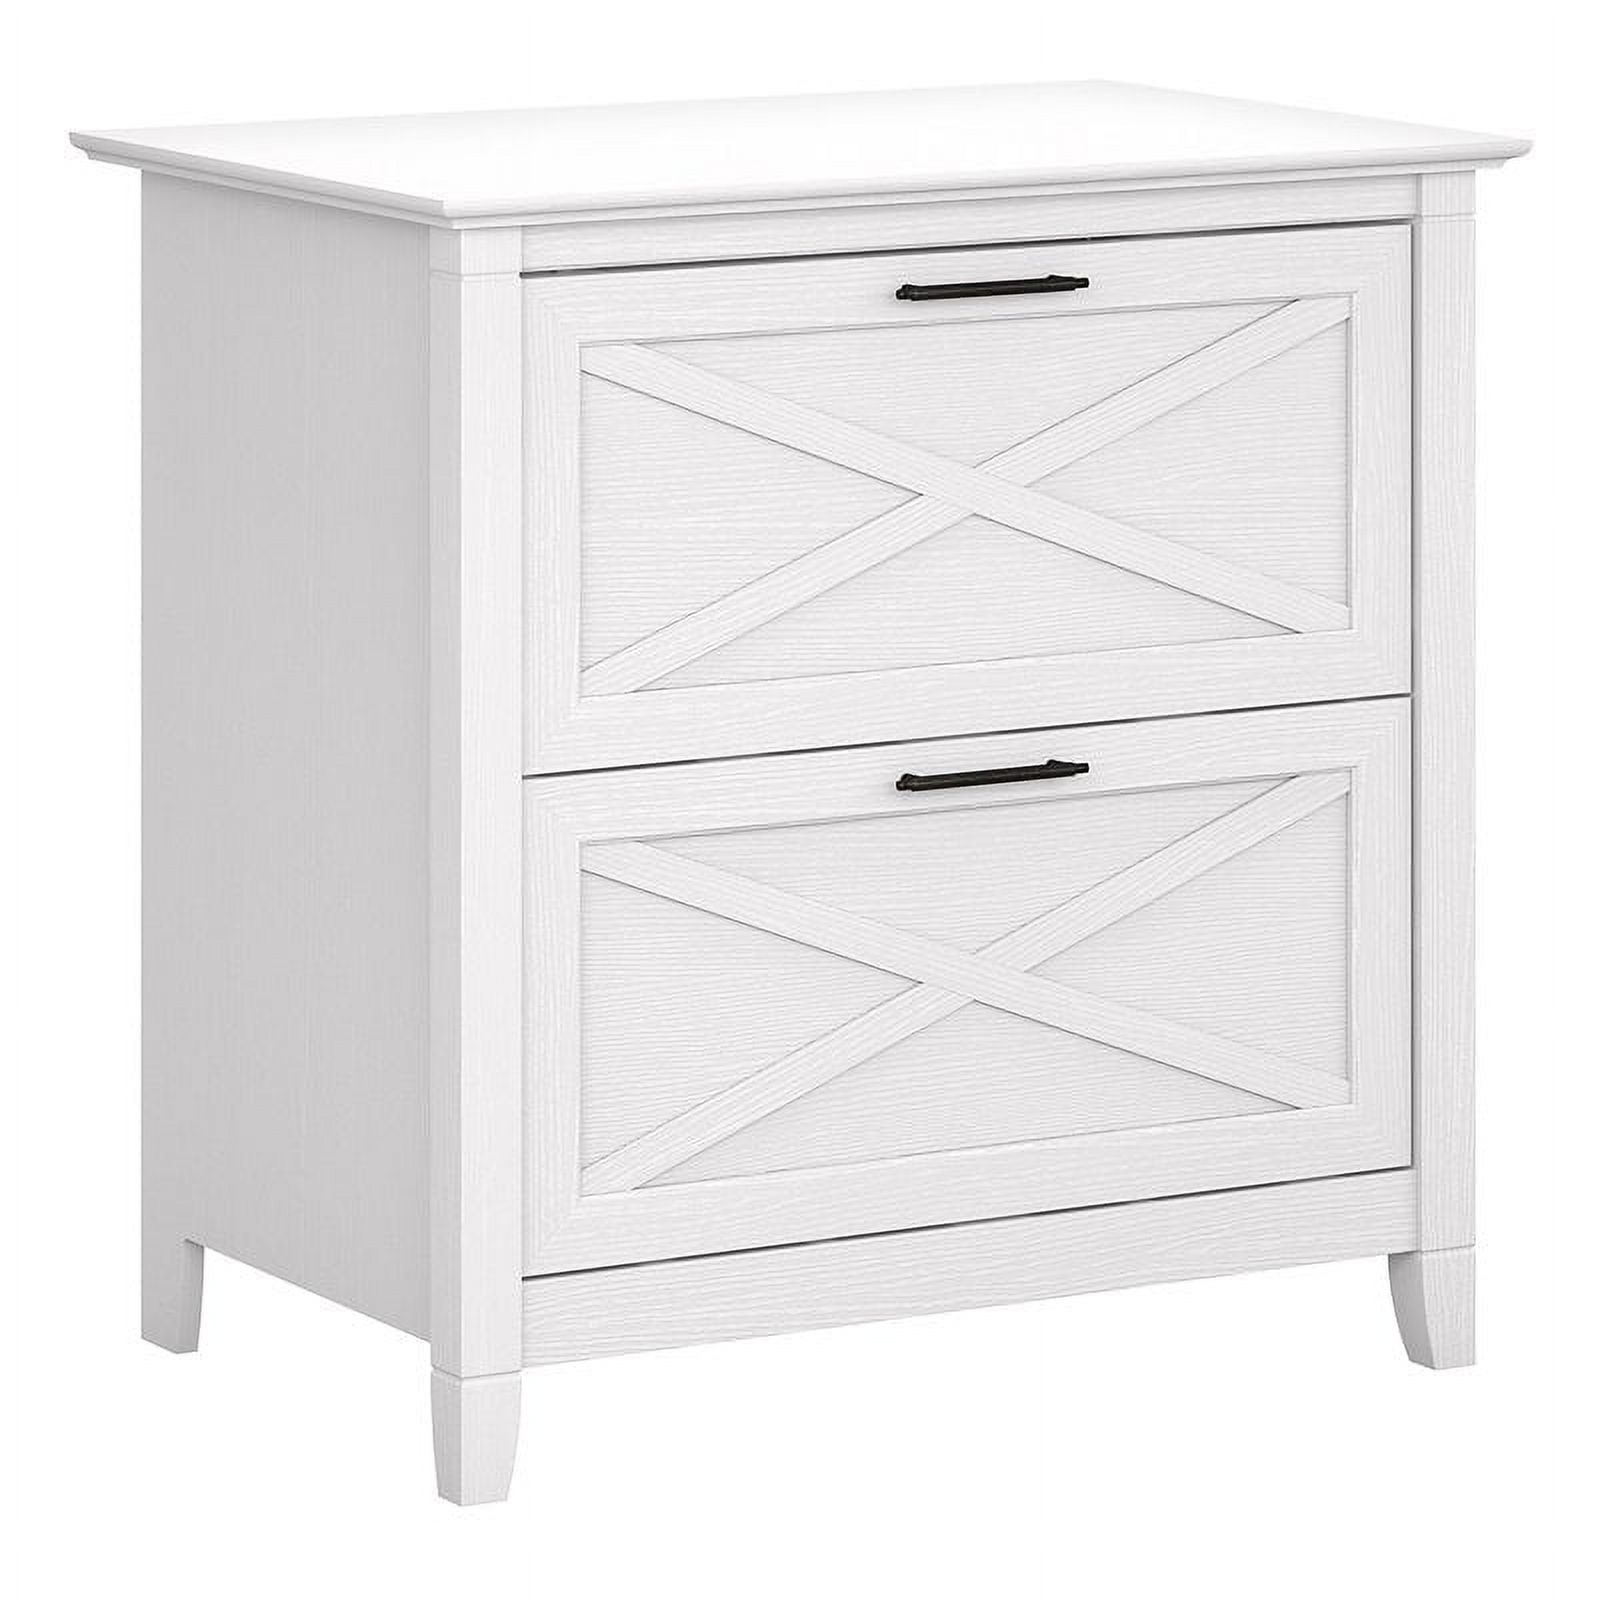 Home Square 2 Piece Lateral Filing Cabinet Set with 2 Drawer in Pure White Oak - image 3 of 8